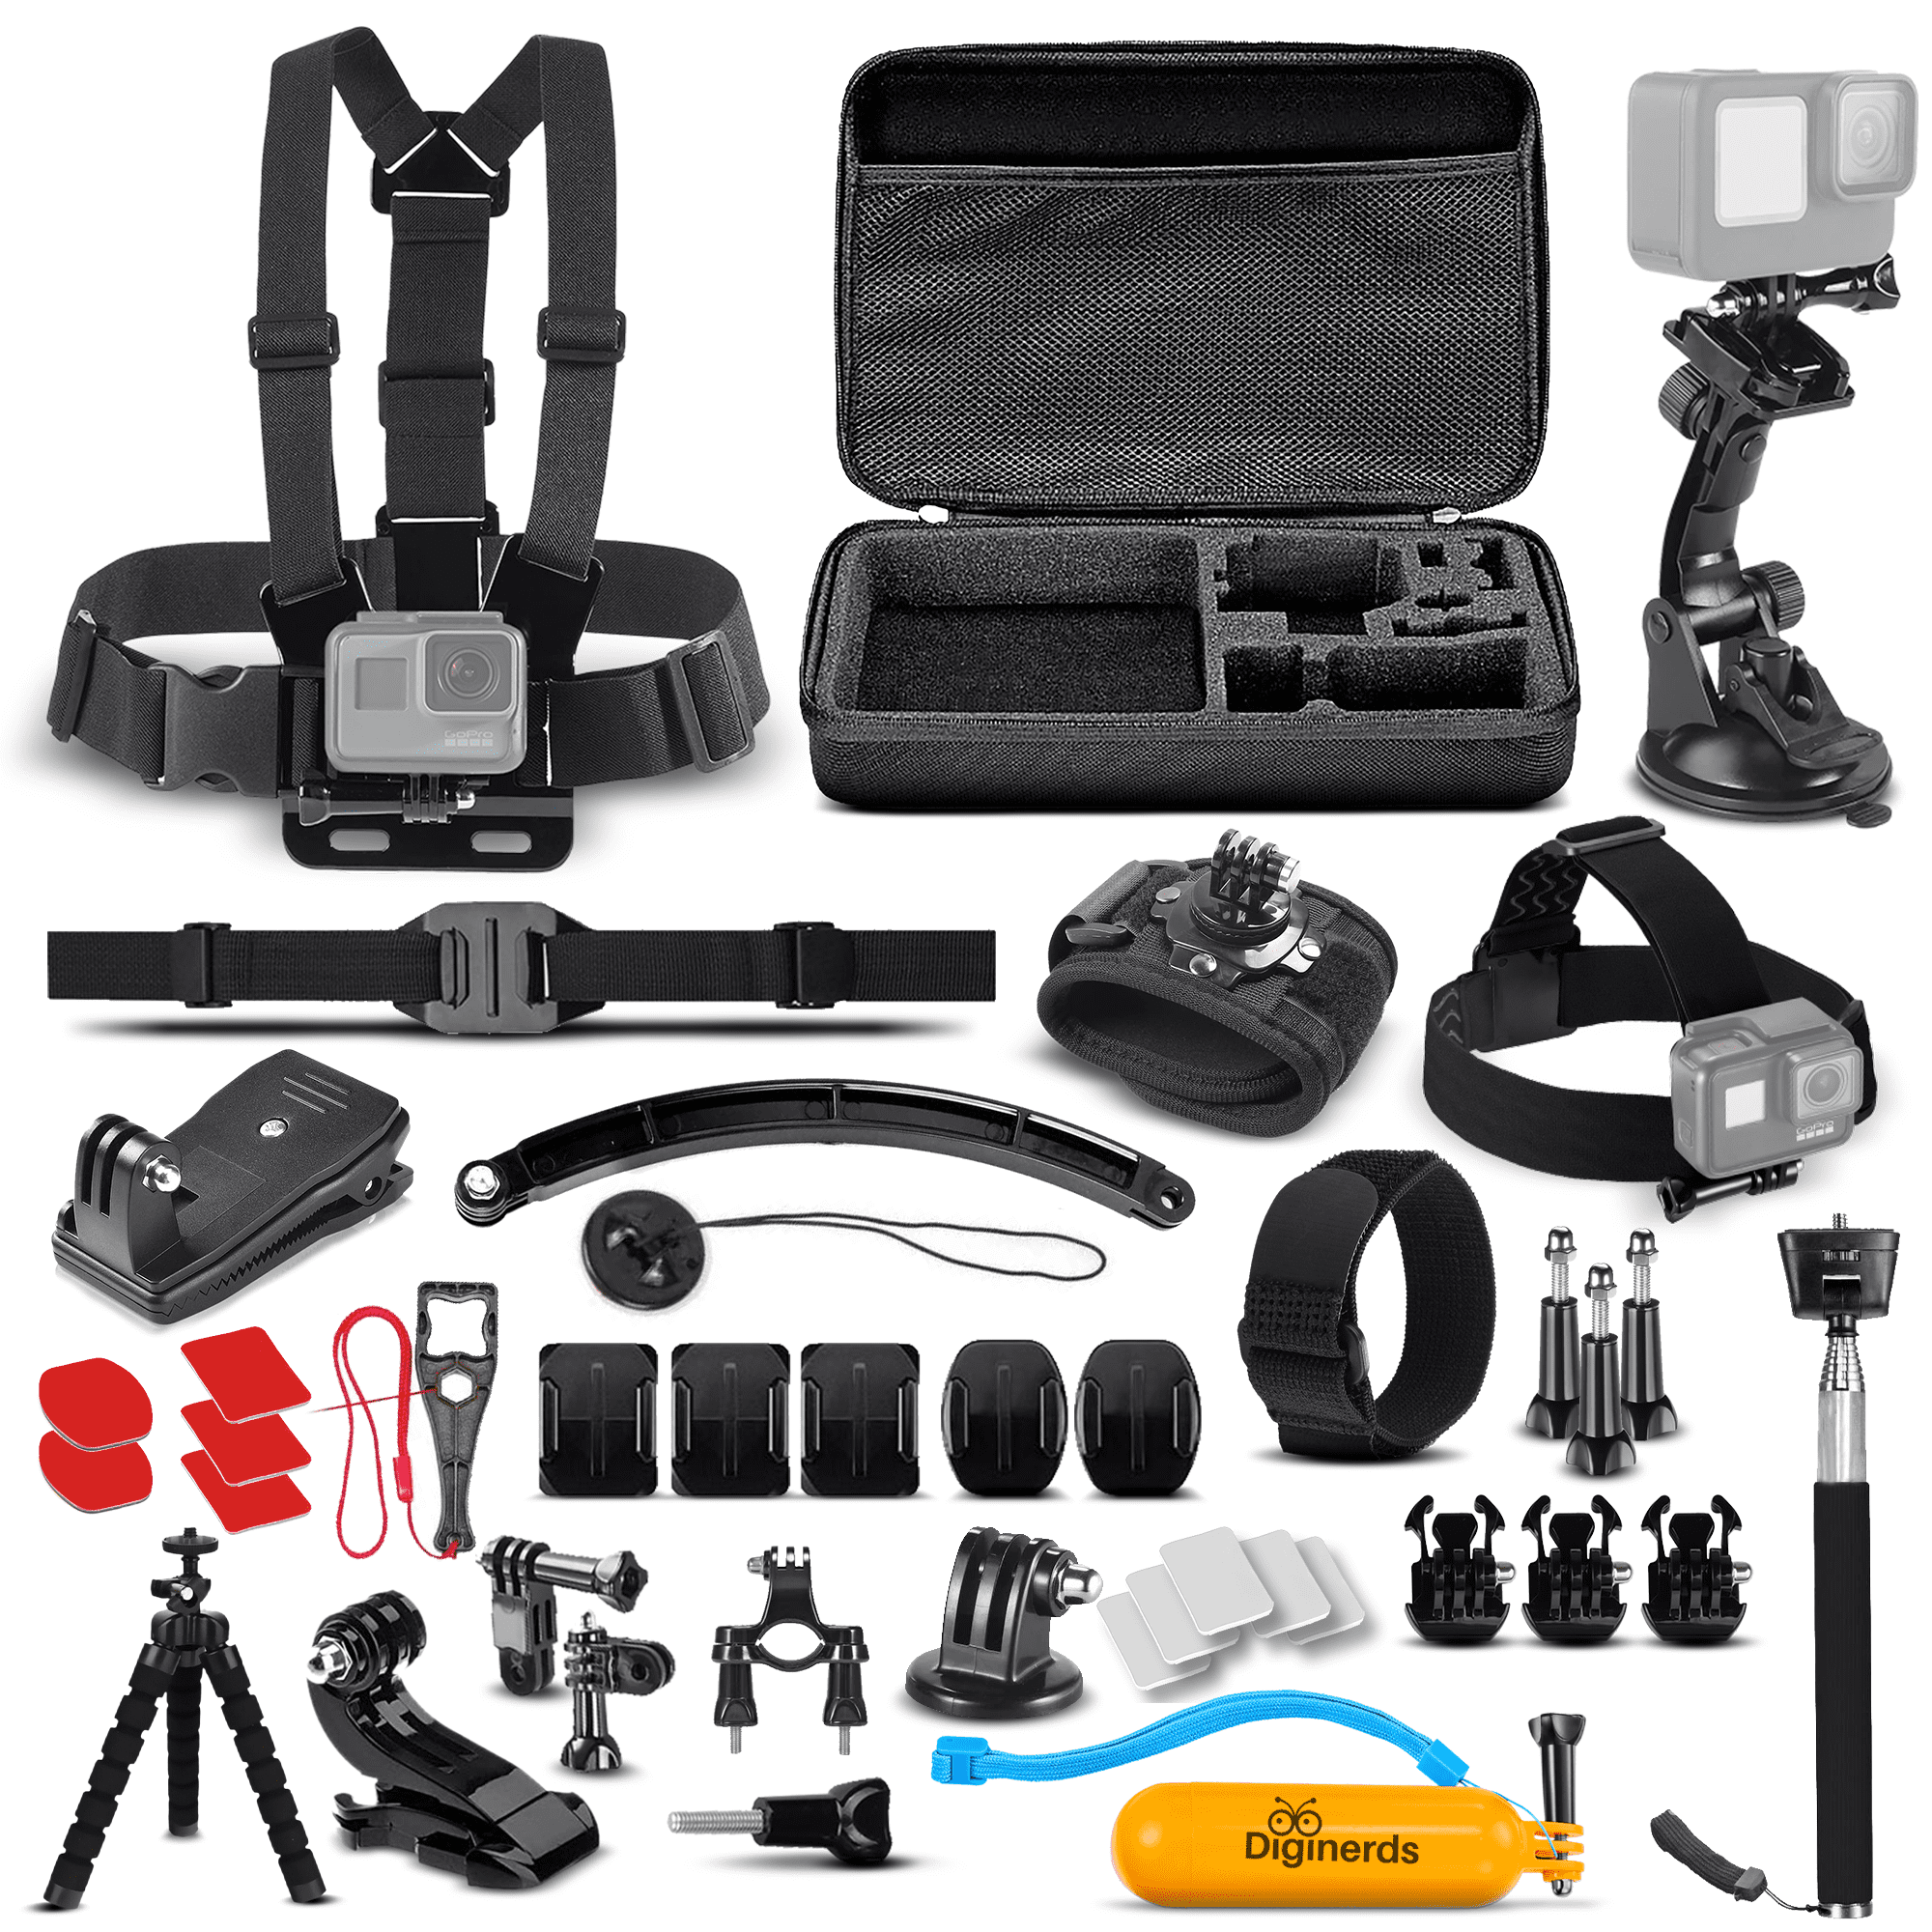  GoPro HERO10 Black Accessory Bundle - Includes HERO10 Camera,  Shorty (Mini Extension Pole + Grip), Magnetic Swivel Clip, Rechargeable  Batteries (2 Total), and Camera Case : Electronics